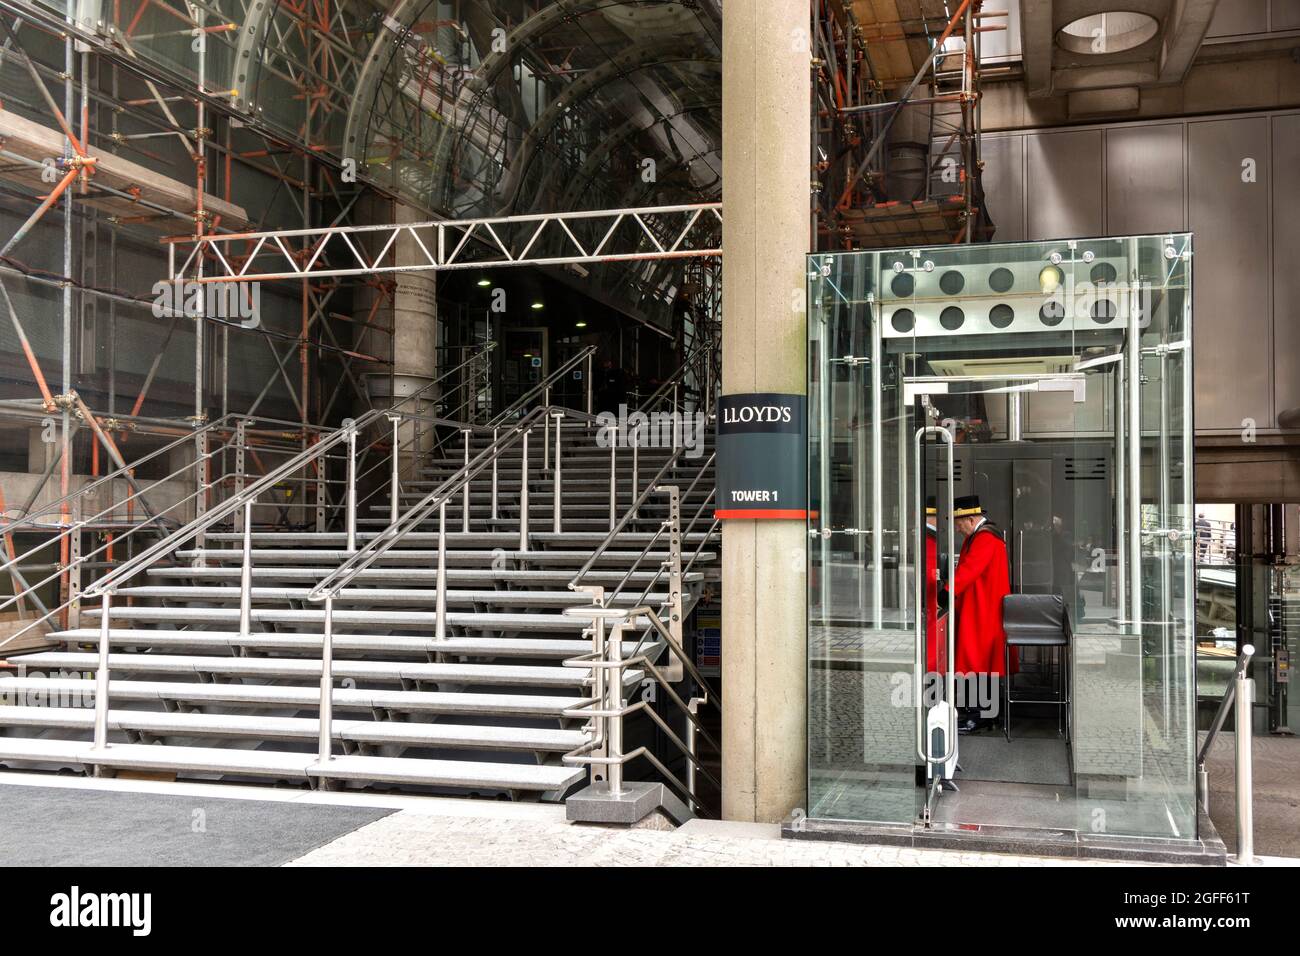 LONDON CITY LIME STREET DOORMAN IN RED COAT AT ENTRANCE TO LLOYDS BUILDING TOWER 1 Stock Photo